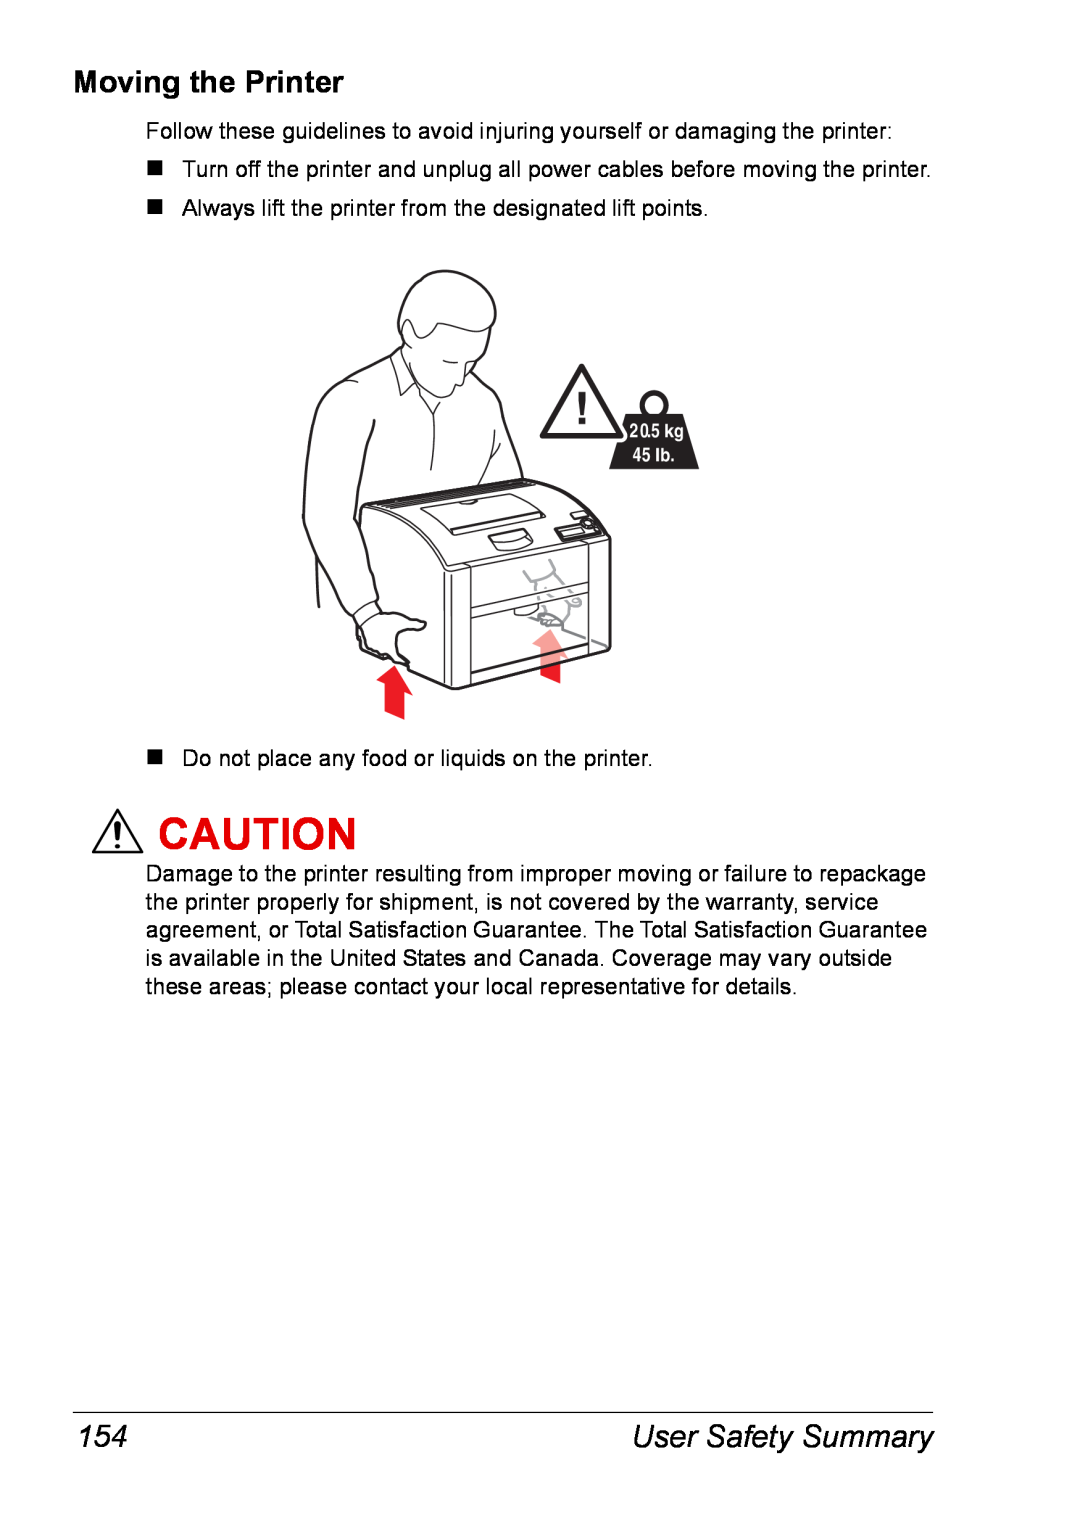 Xerox 6120 manual Moving the Printer, User Safety Summary 